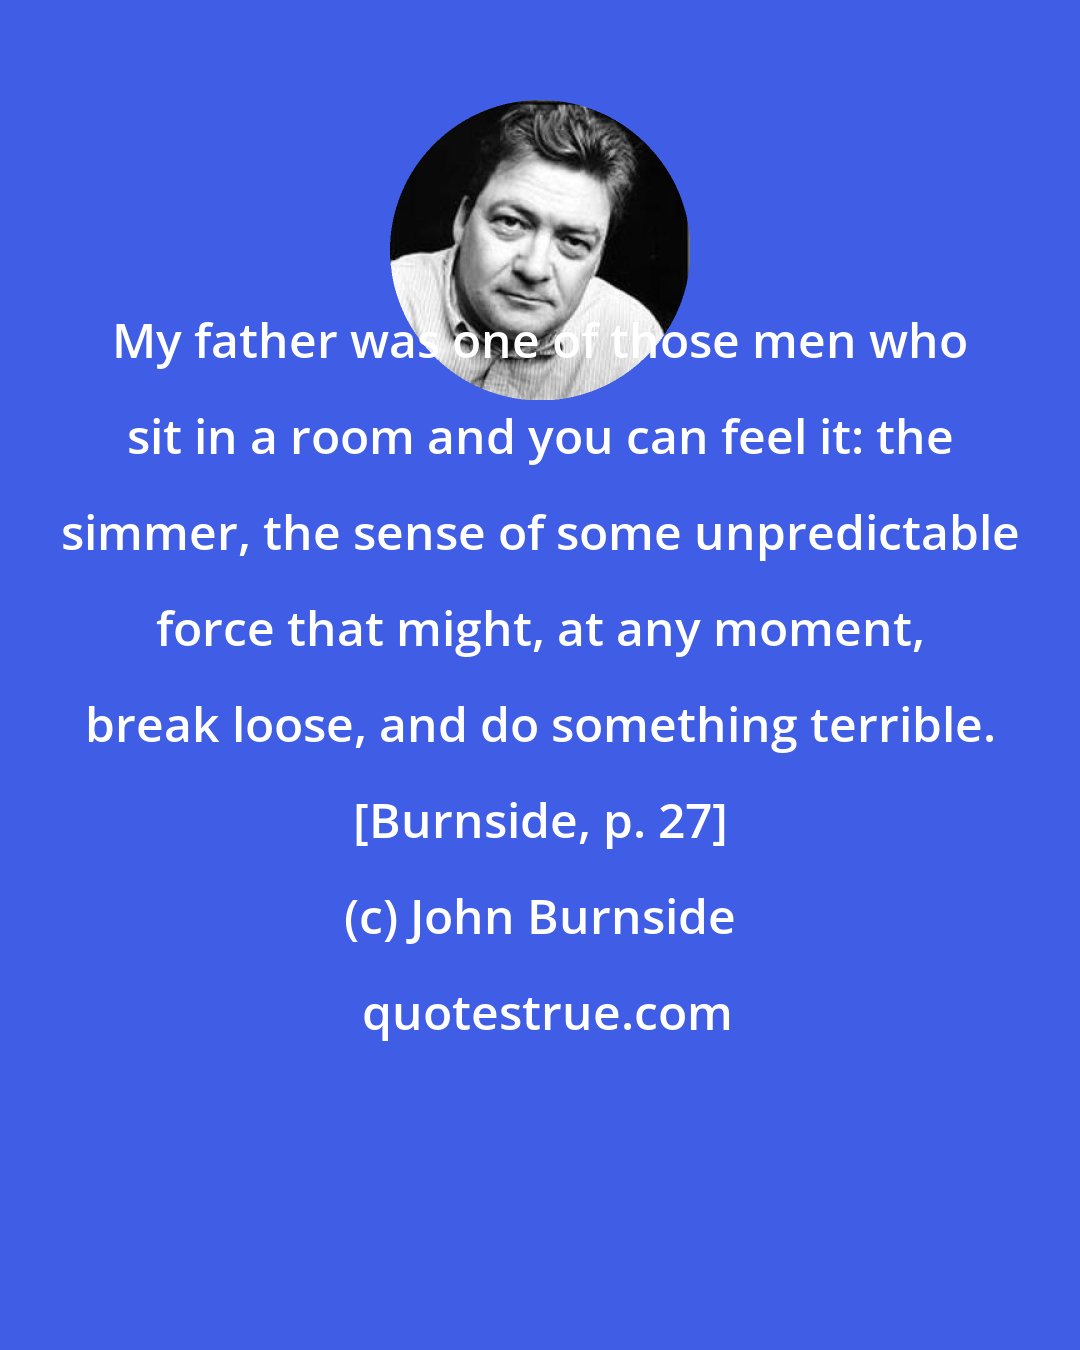 John Burnside: My father was one of those men who sit in a room and you can feel it: the simmer, the sense of some unpredictable force that might, at any moment, break loose, and do something terrible. [Burnside, p. 27]